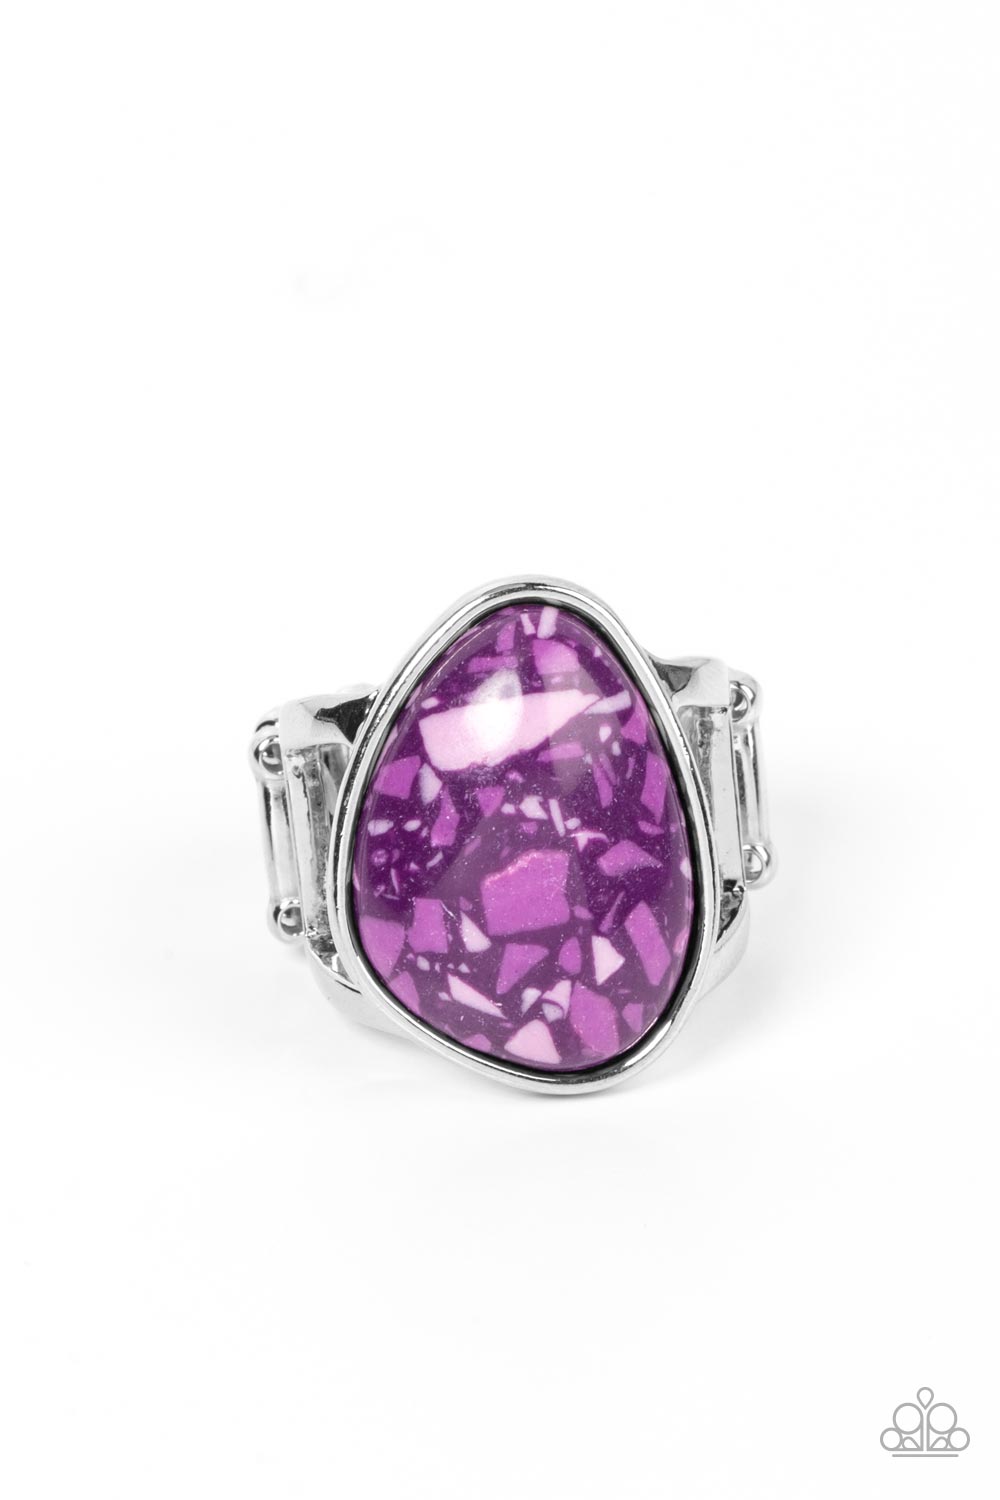 Earth Hearth Purple Ring - Paparazzi Accessories  Featuring a faux terrazzo finish, an asymmetrical purple stone is encased in a sleek silver frame atop layered silver bands for an earthy inspiration. Features a stretchy band for a flexible fit.  Sold as one individual ring.